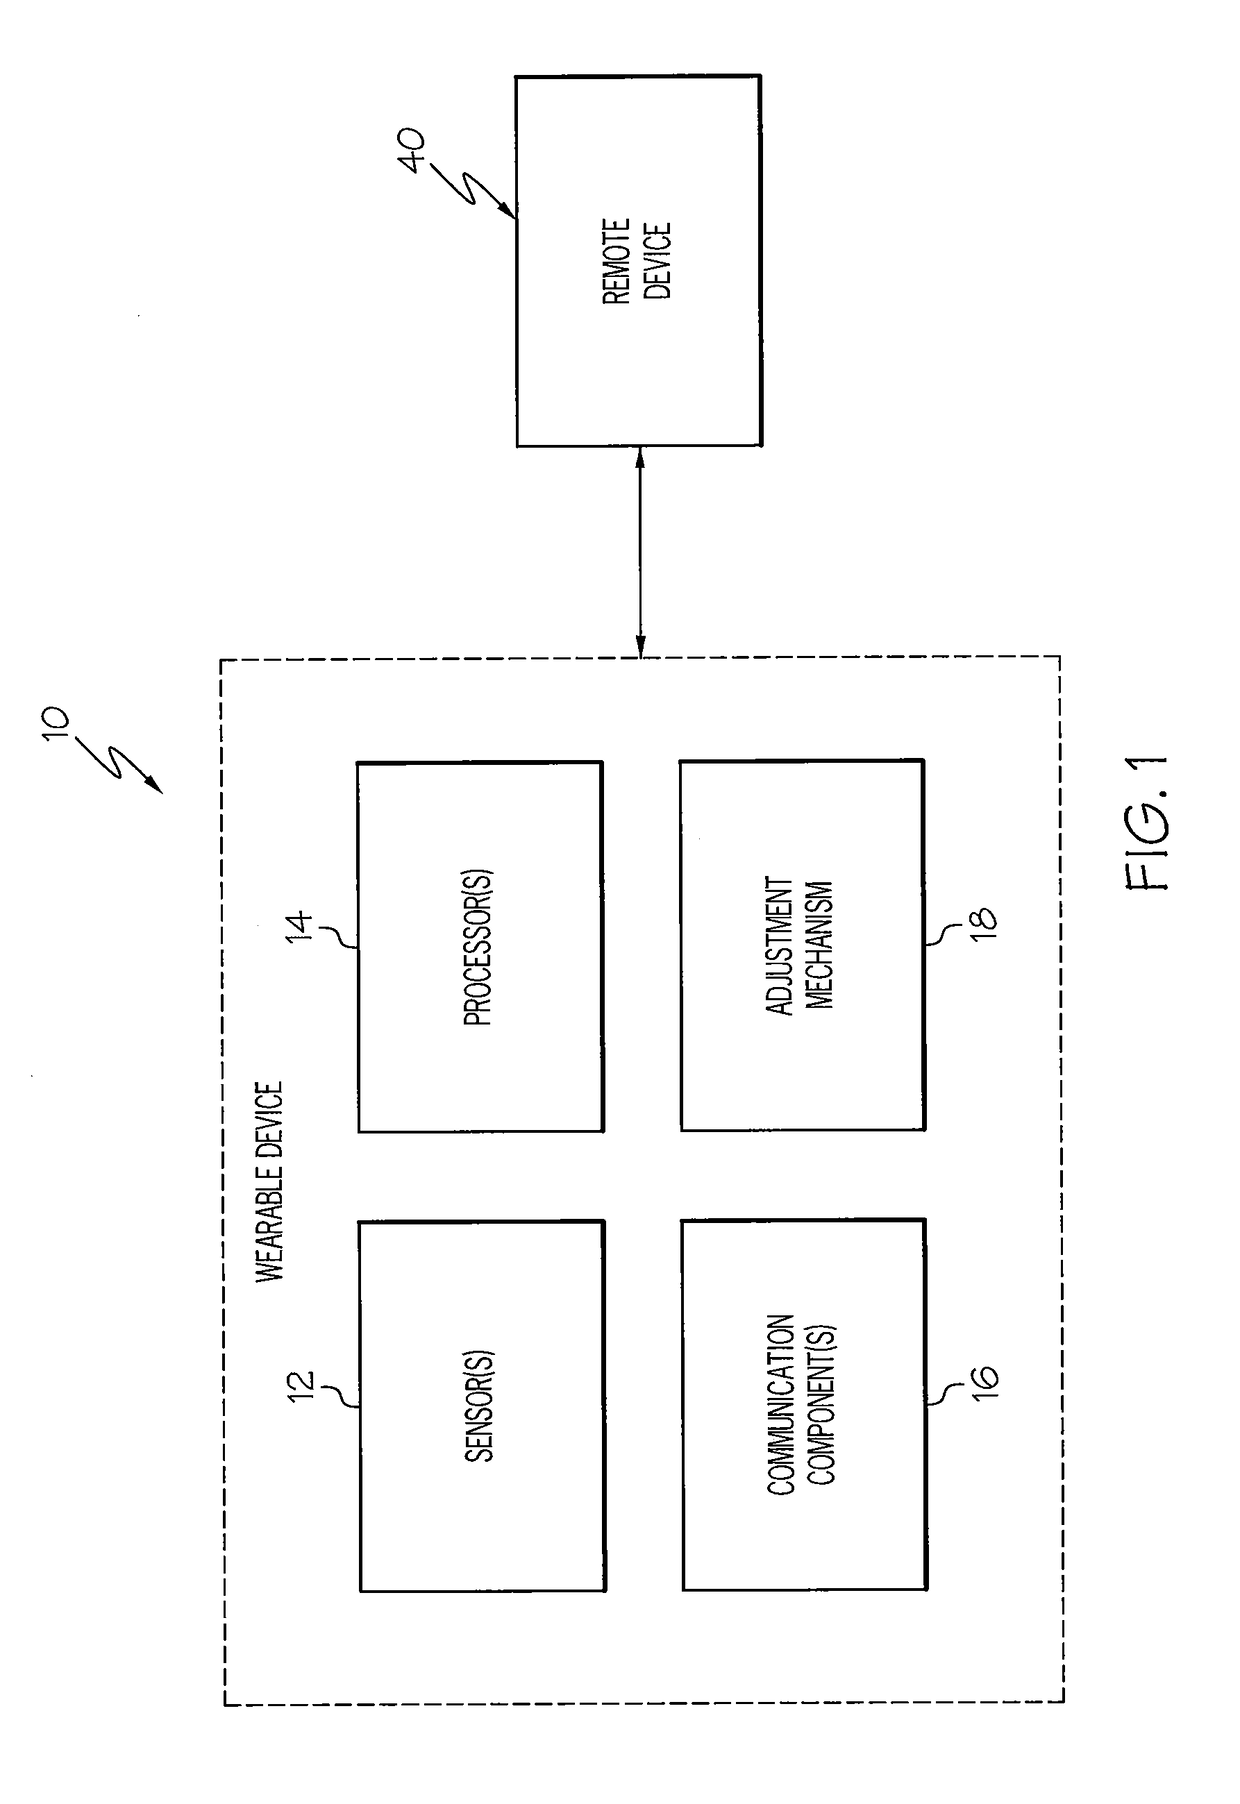 Methods and apparatus for improving signal quality in wearable biometric monitoring devices